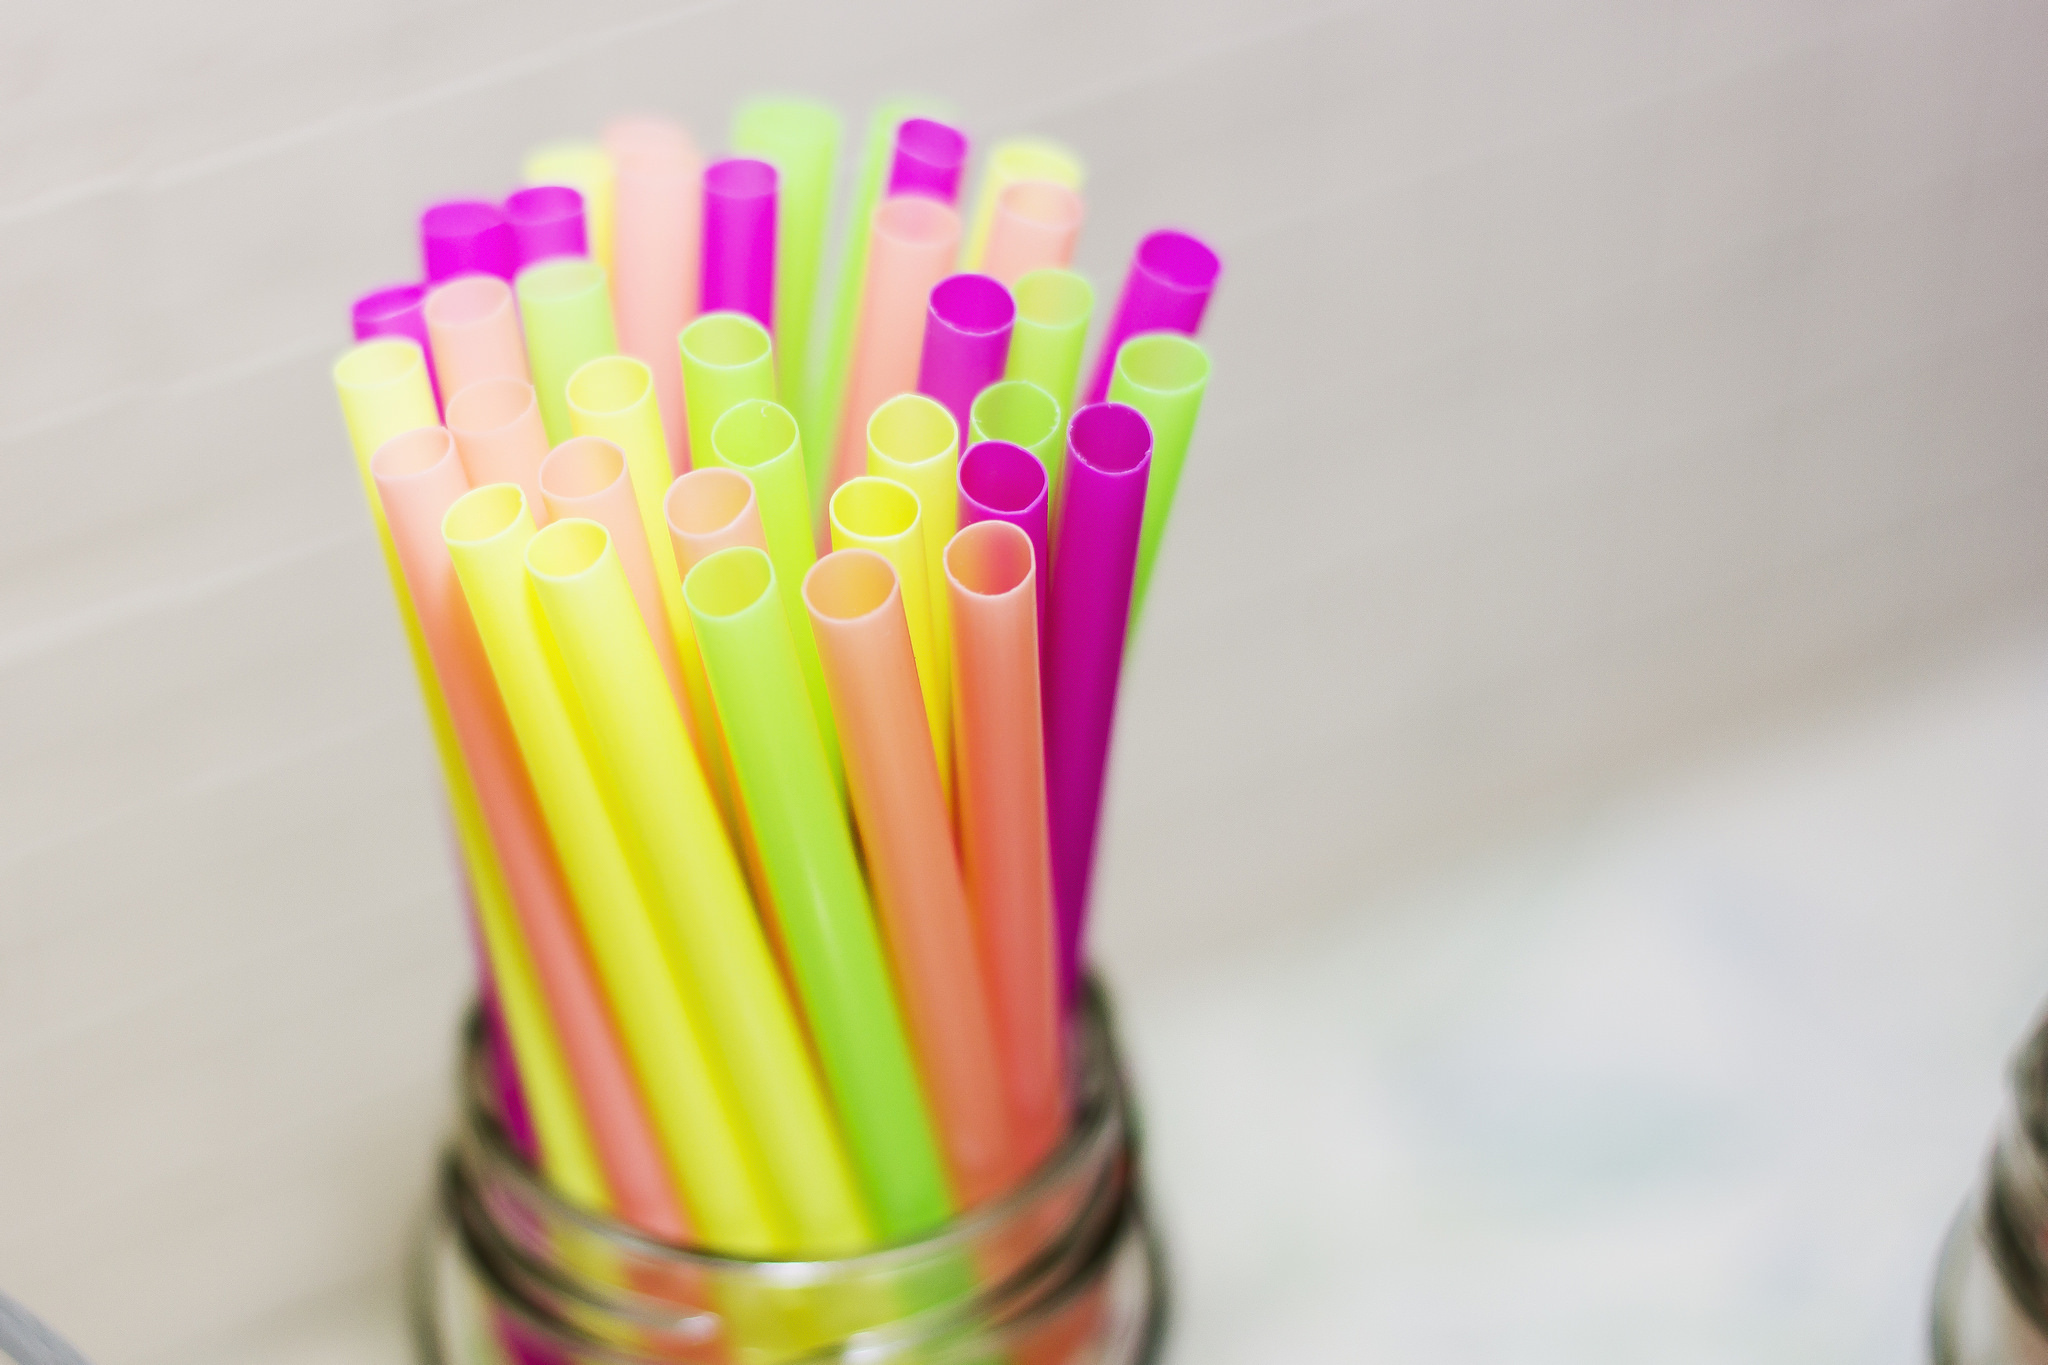 photography, colors, close up, straw